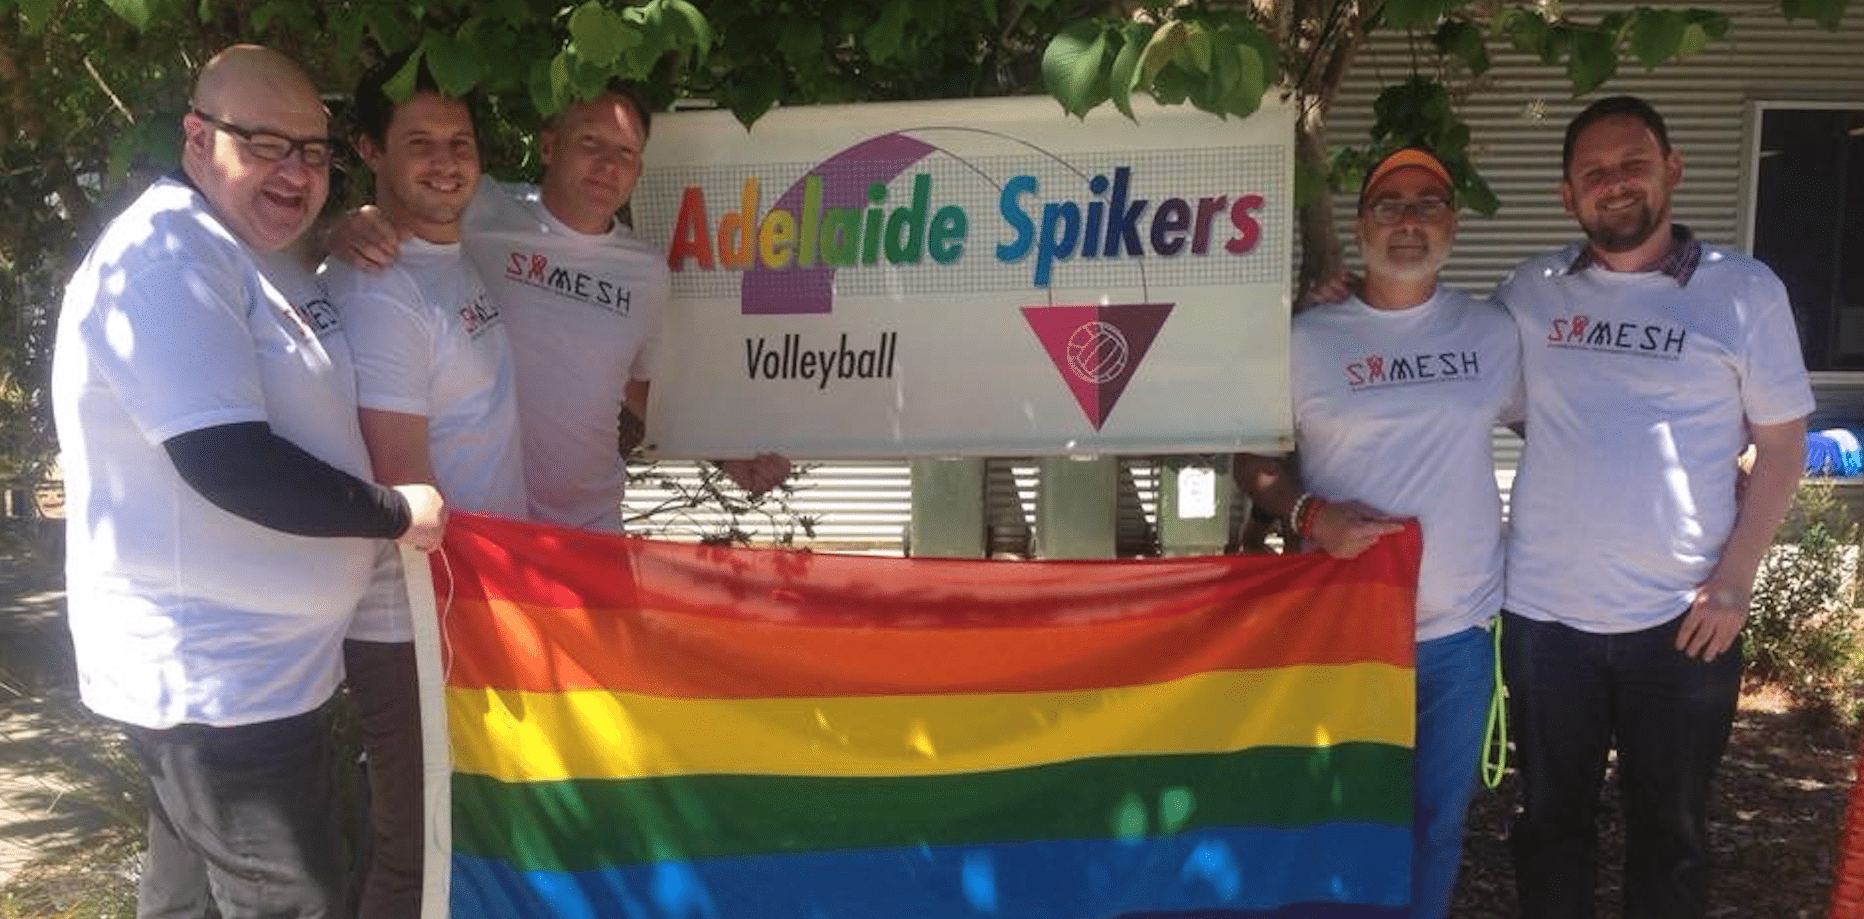 The volleyball club offering a safe space for LGBTI people in Adelaide